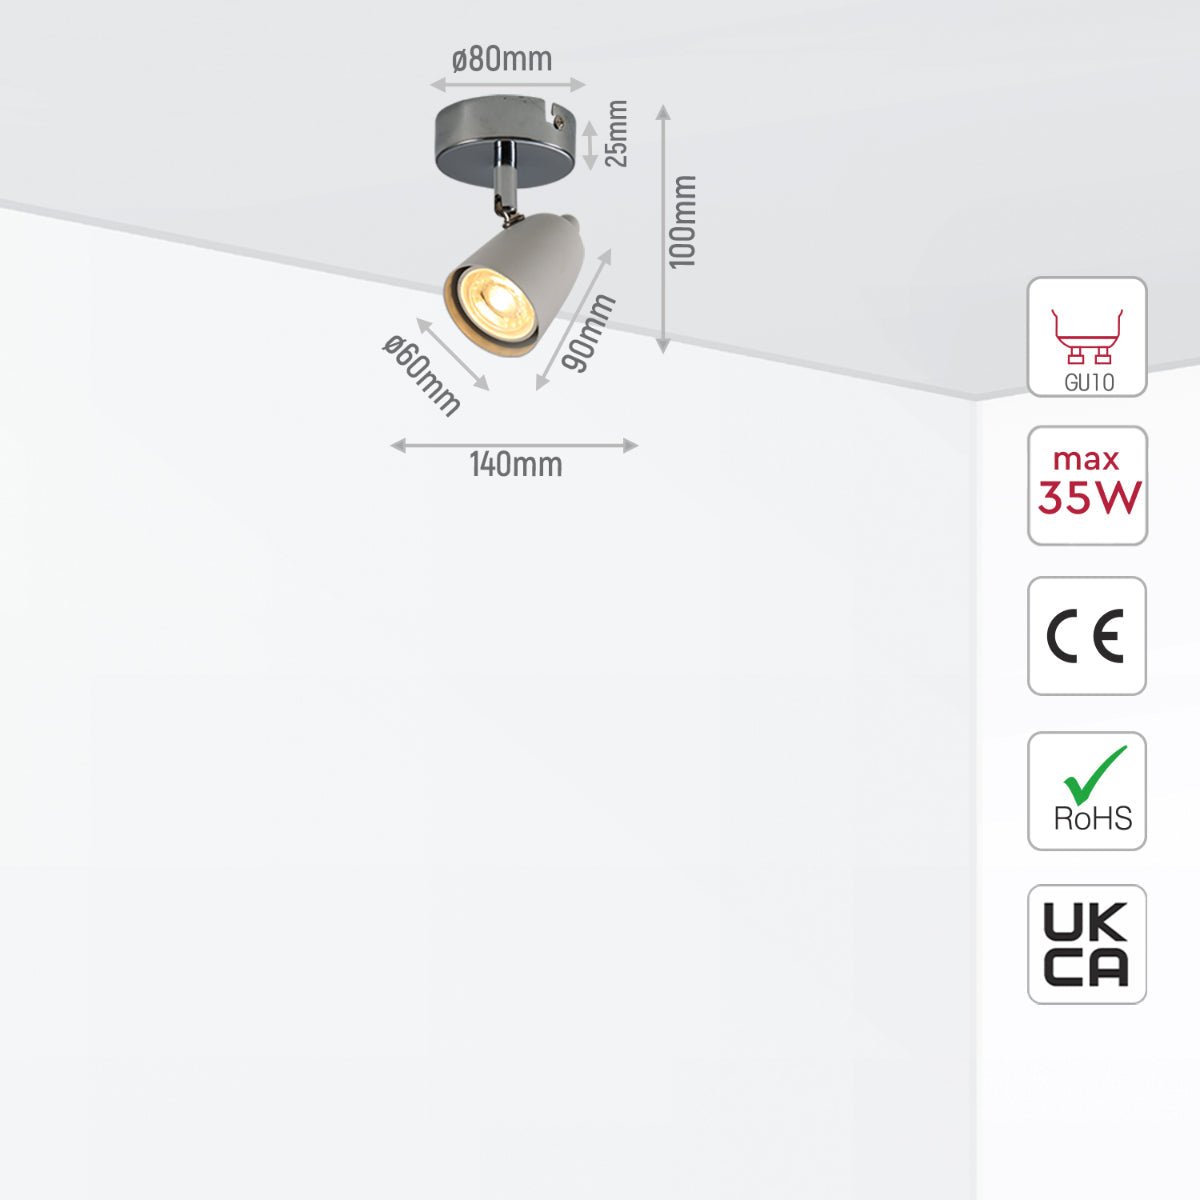 Size and specs of 1 Way Skurupp Spotlight with GU10 Fitting Chrome White | TEKLED 172-03096